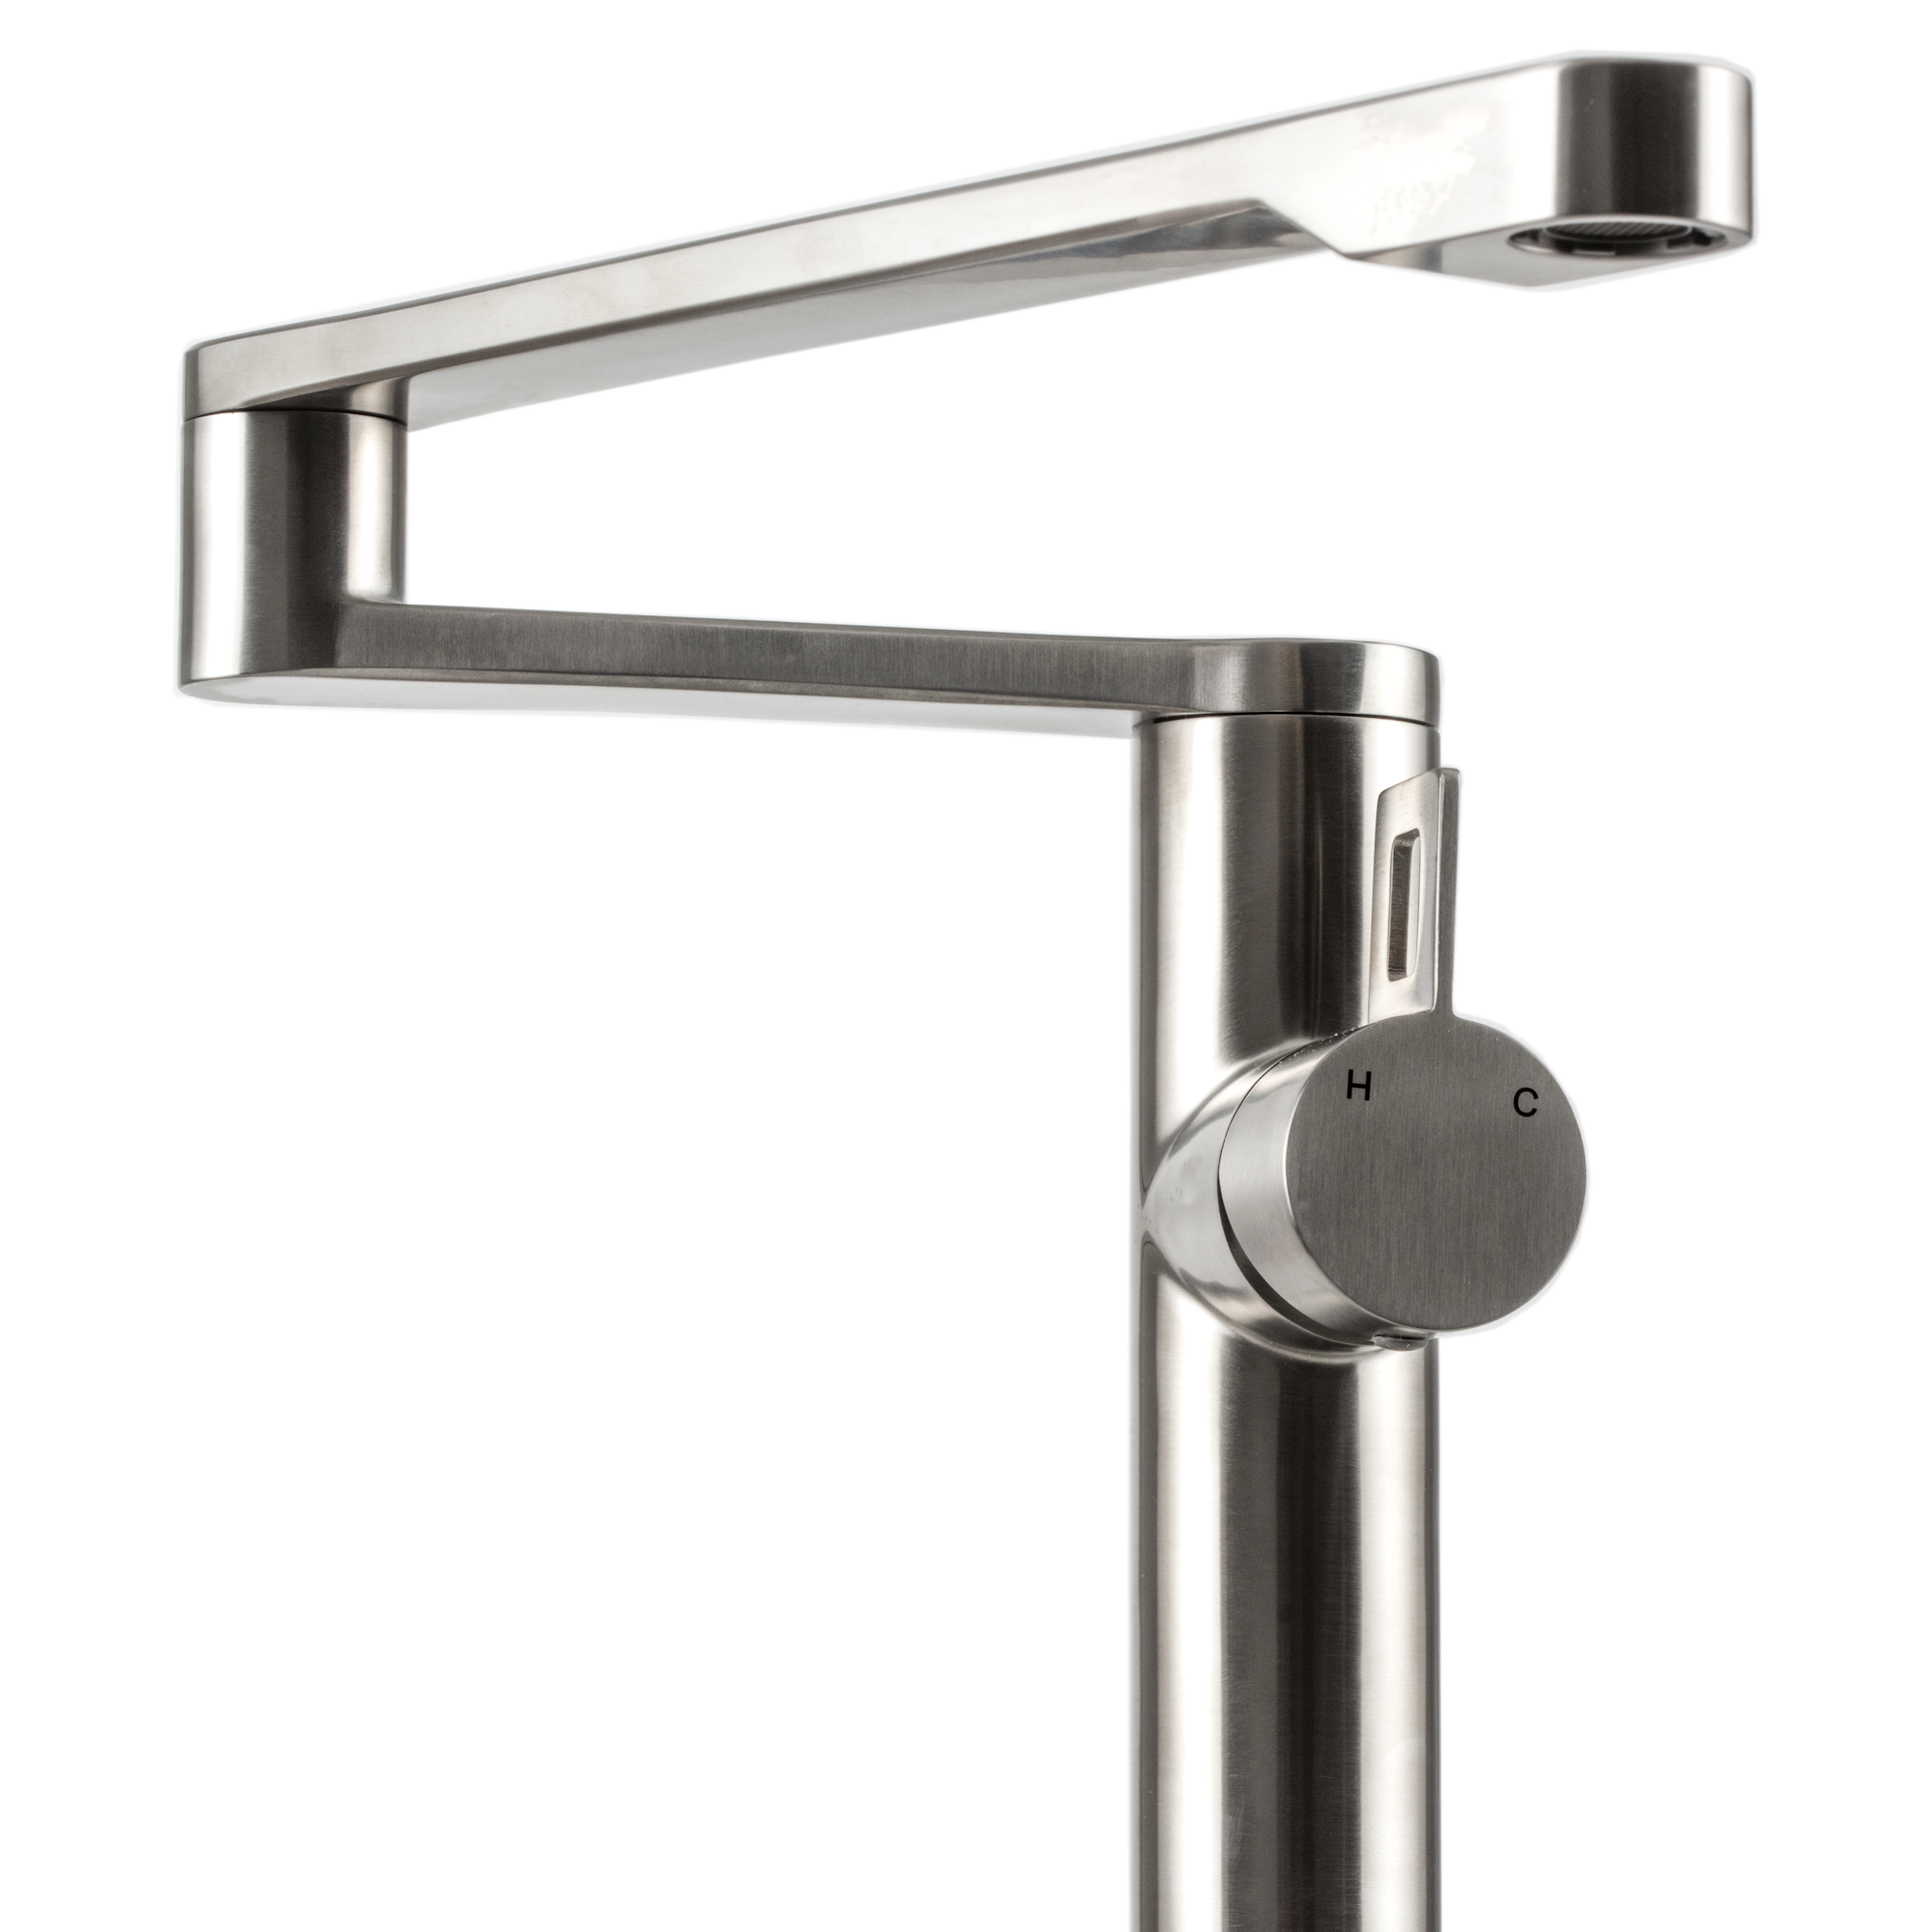 Brushed Nickel Extendable and Collapsible Kitchen and Bar Faucet KF1000-BN